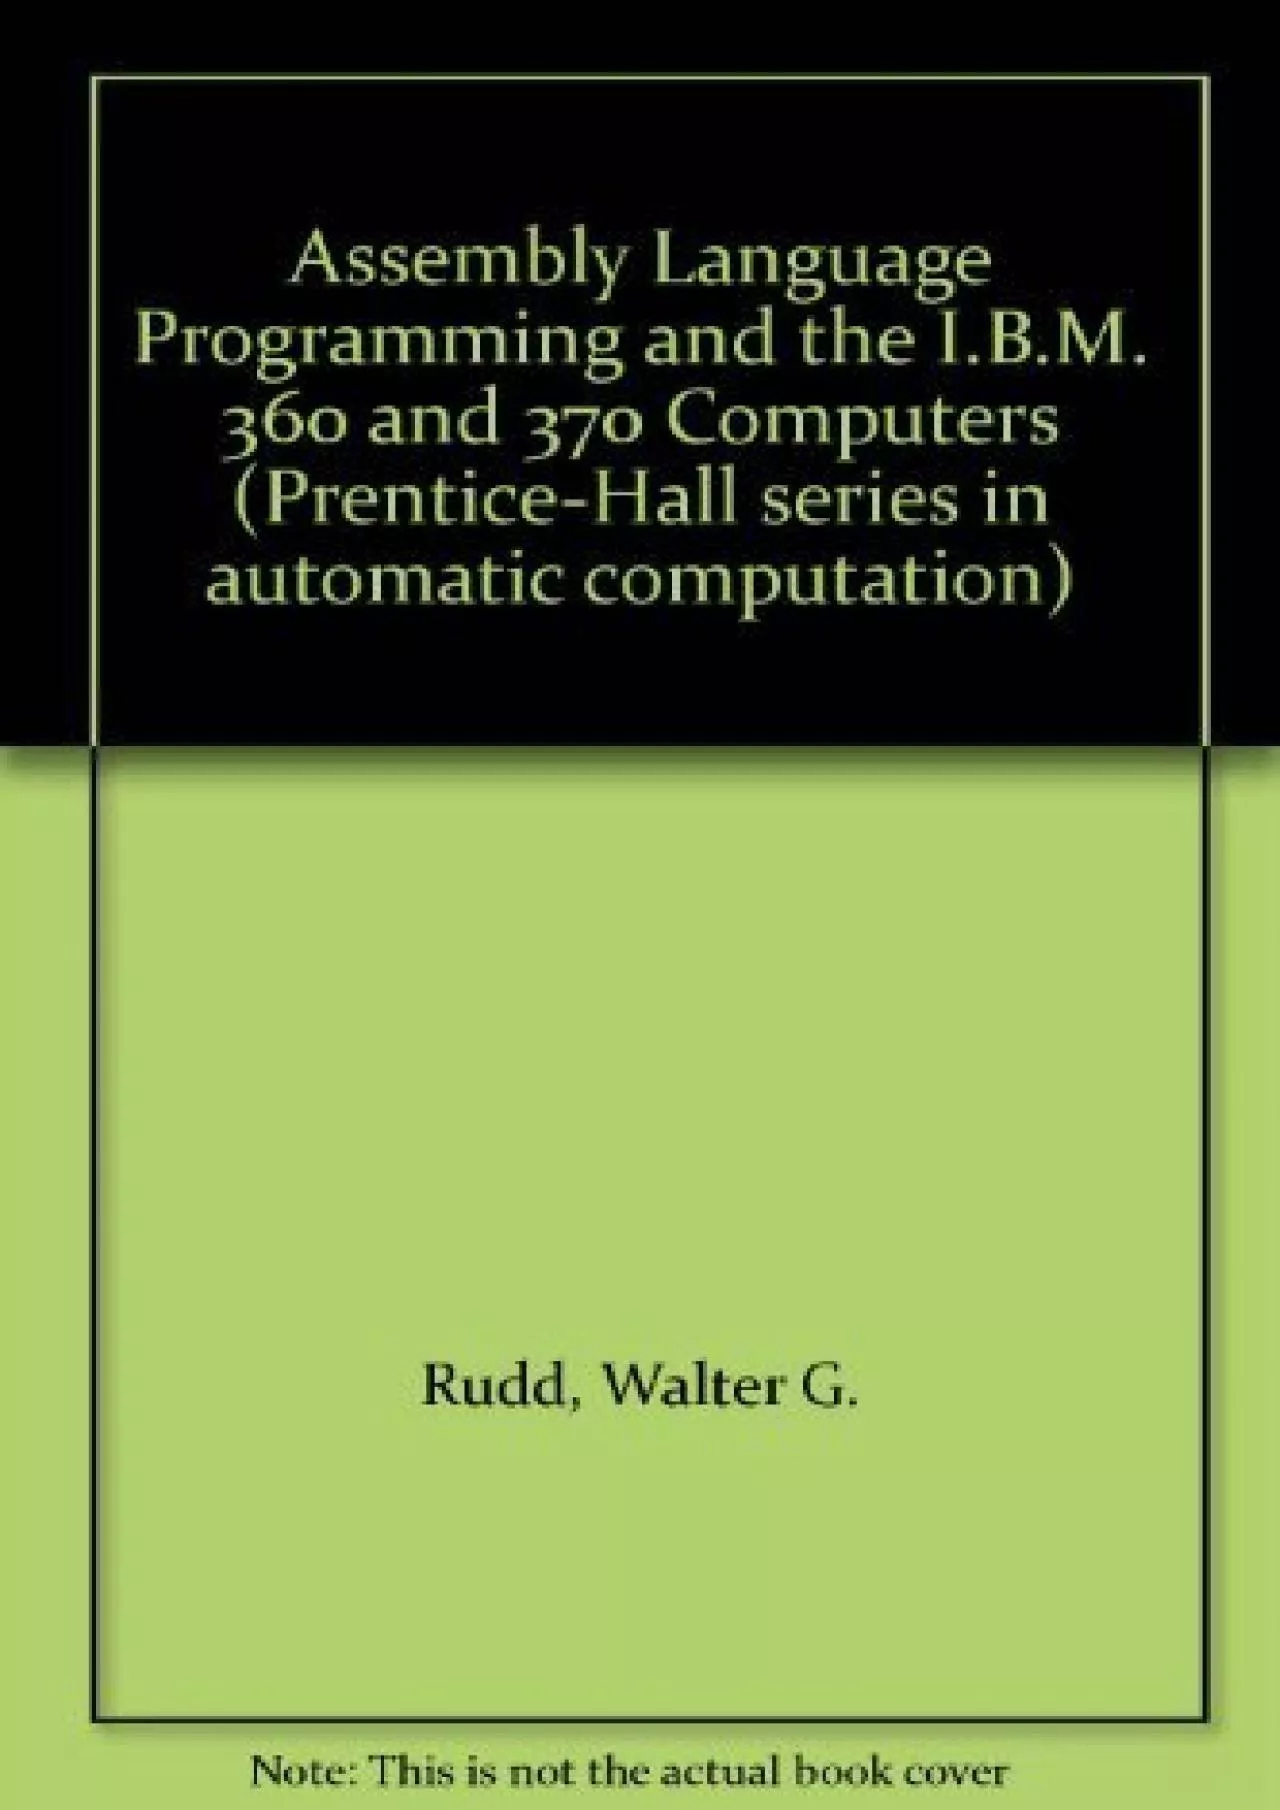 [eBOOK]-Assembly language programming and the IBM 360 and 370 computers (Prentice-Hall